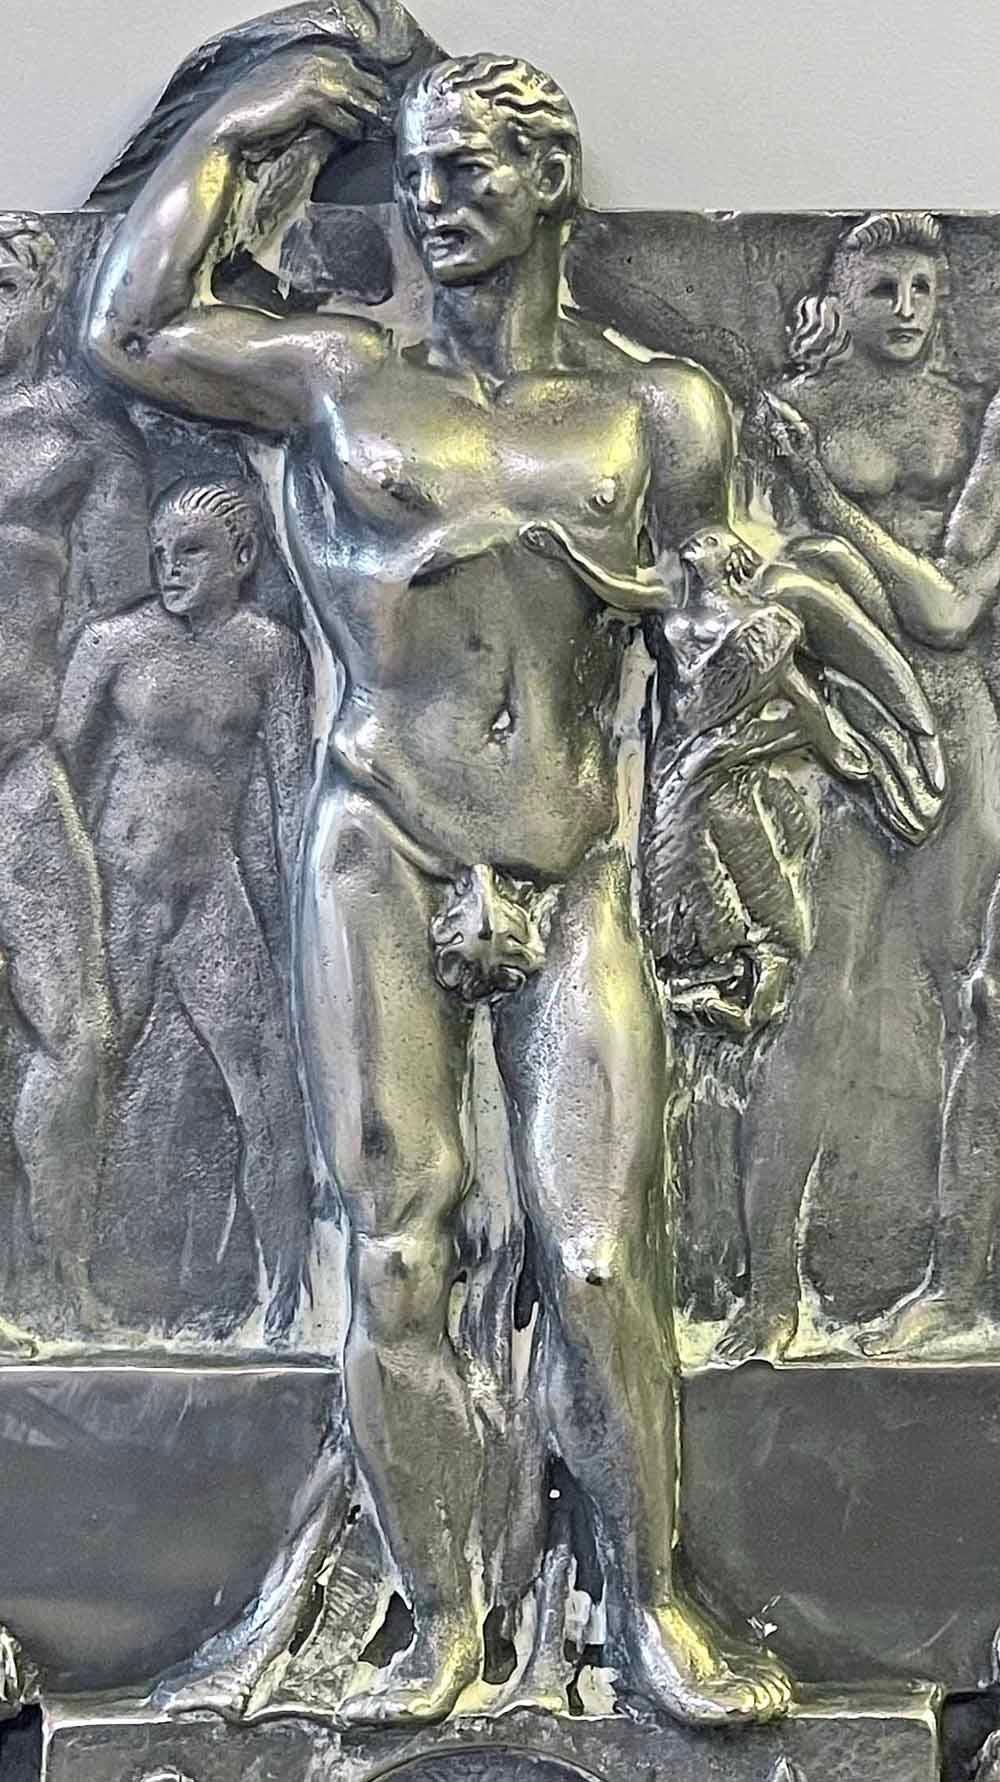 In the 1930s, when Italy was once again valorizing and idealizing the male nude -- witness the famous crescent of nude male athletes at the Foro Italico in Rome -- this silvered bronze panel was sculpted with a frieze of strong figures to honor a